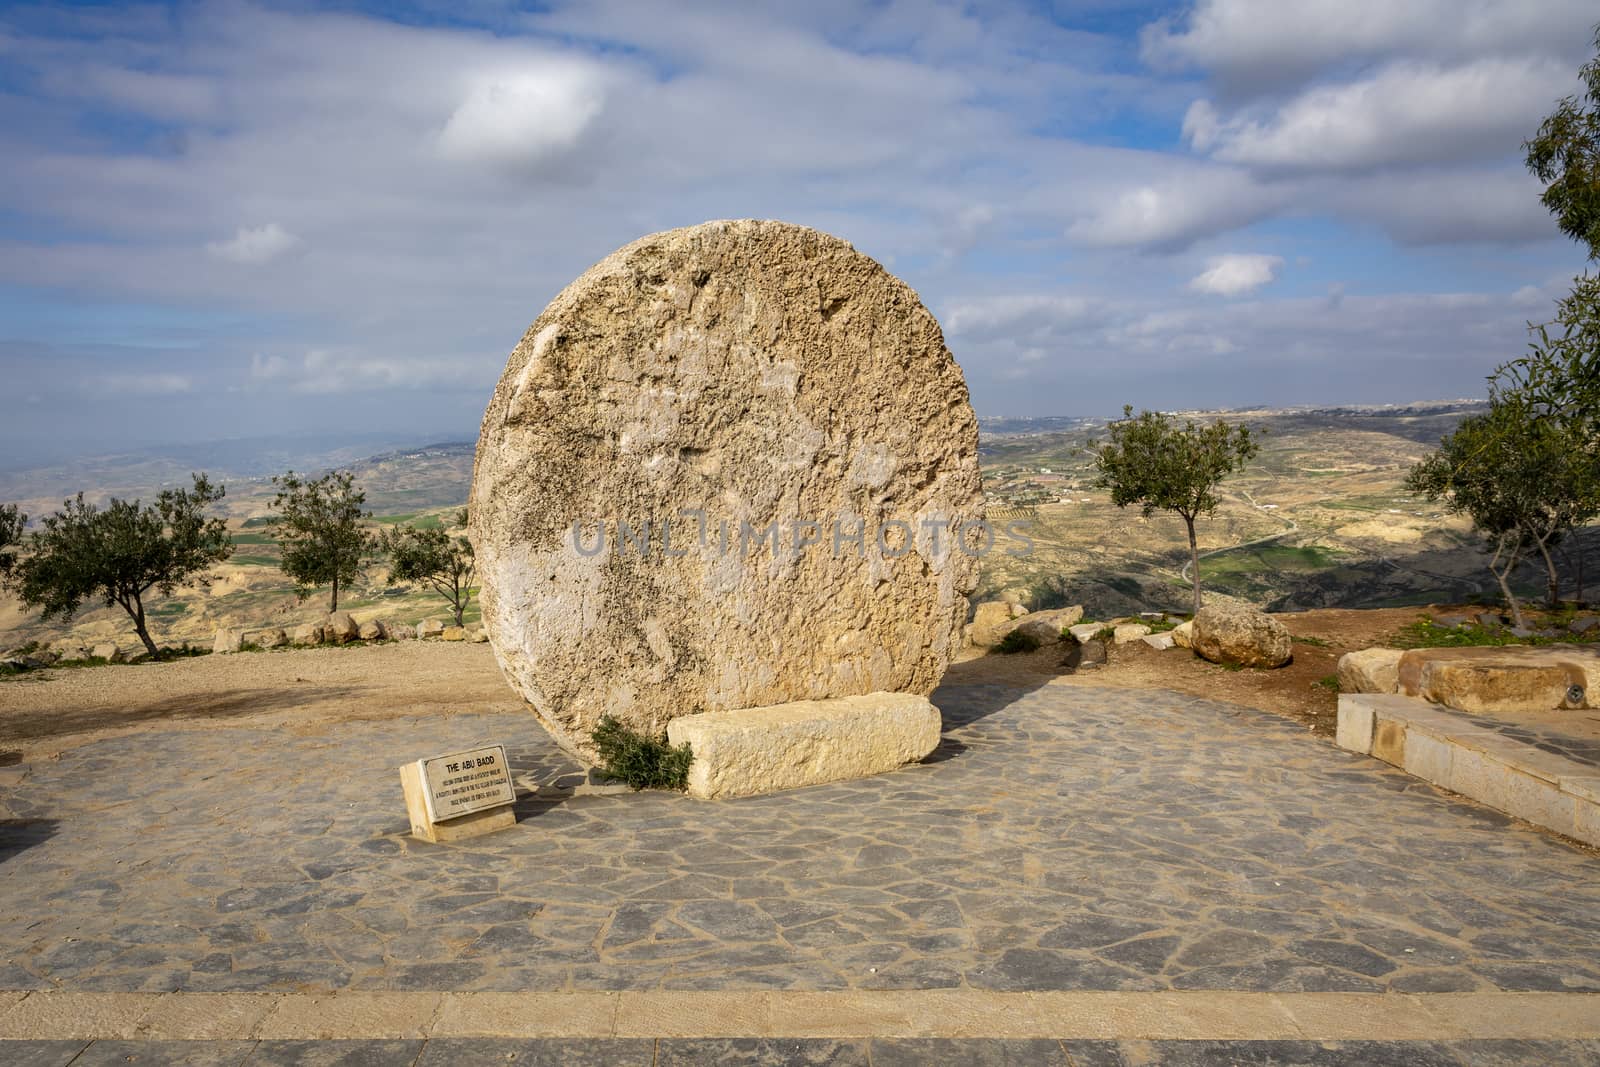 Abu Badd rolling wheel at Mount Nebo, Rolling stone used as the fortified door of a Byzantine monastery by kb79